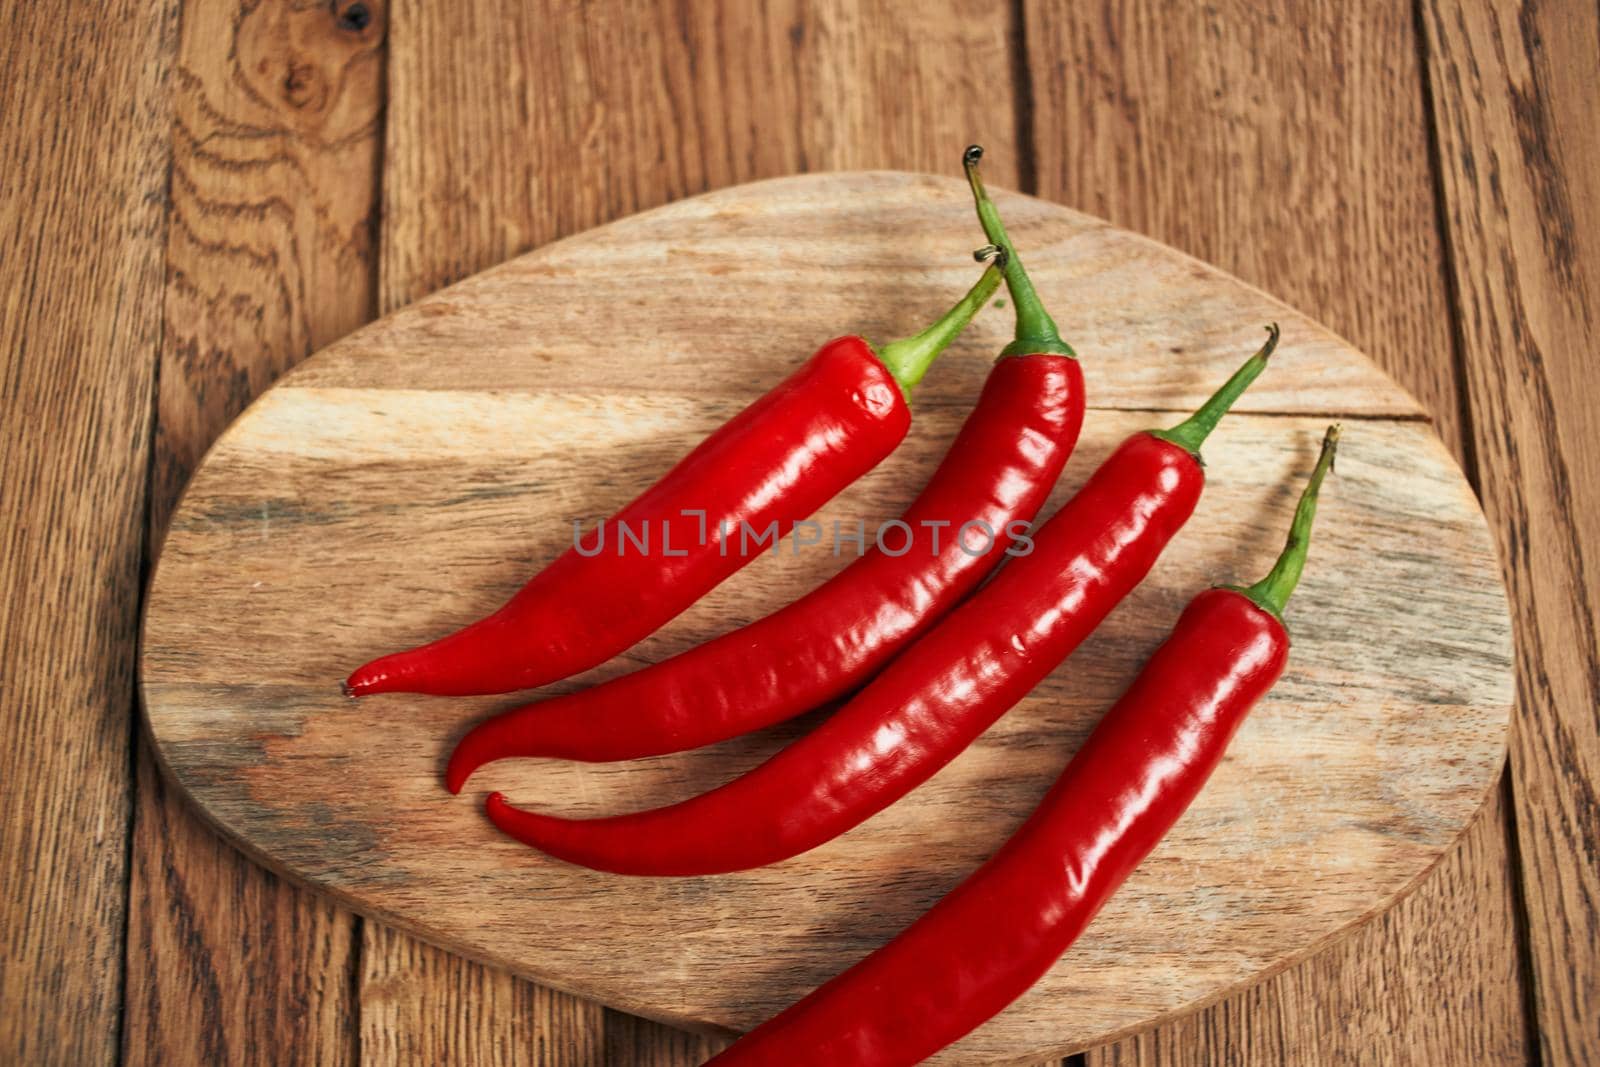 red hot chili peppers on a wooden board kitchen ingredients. High quality photo